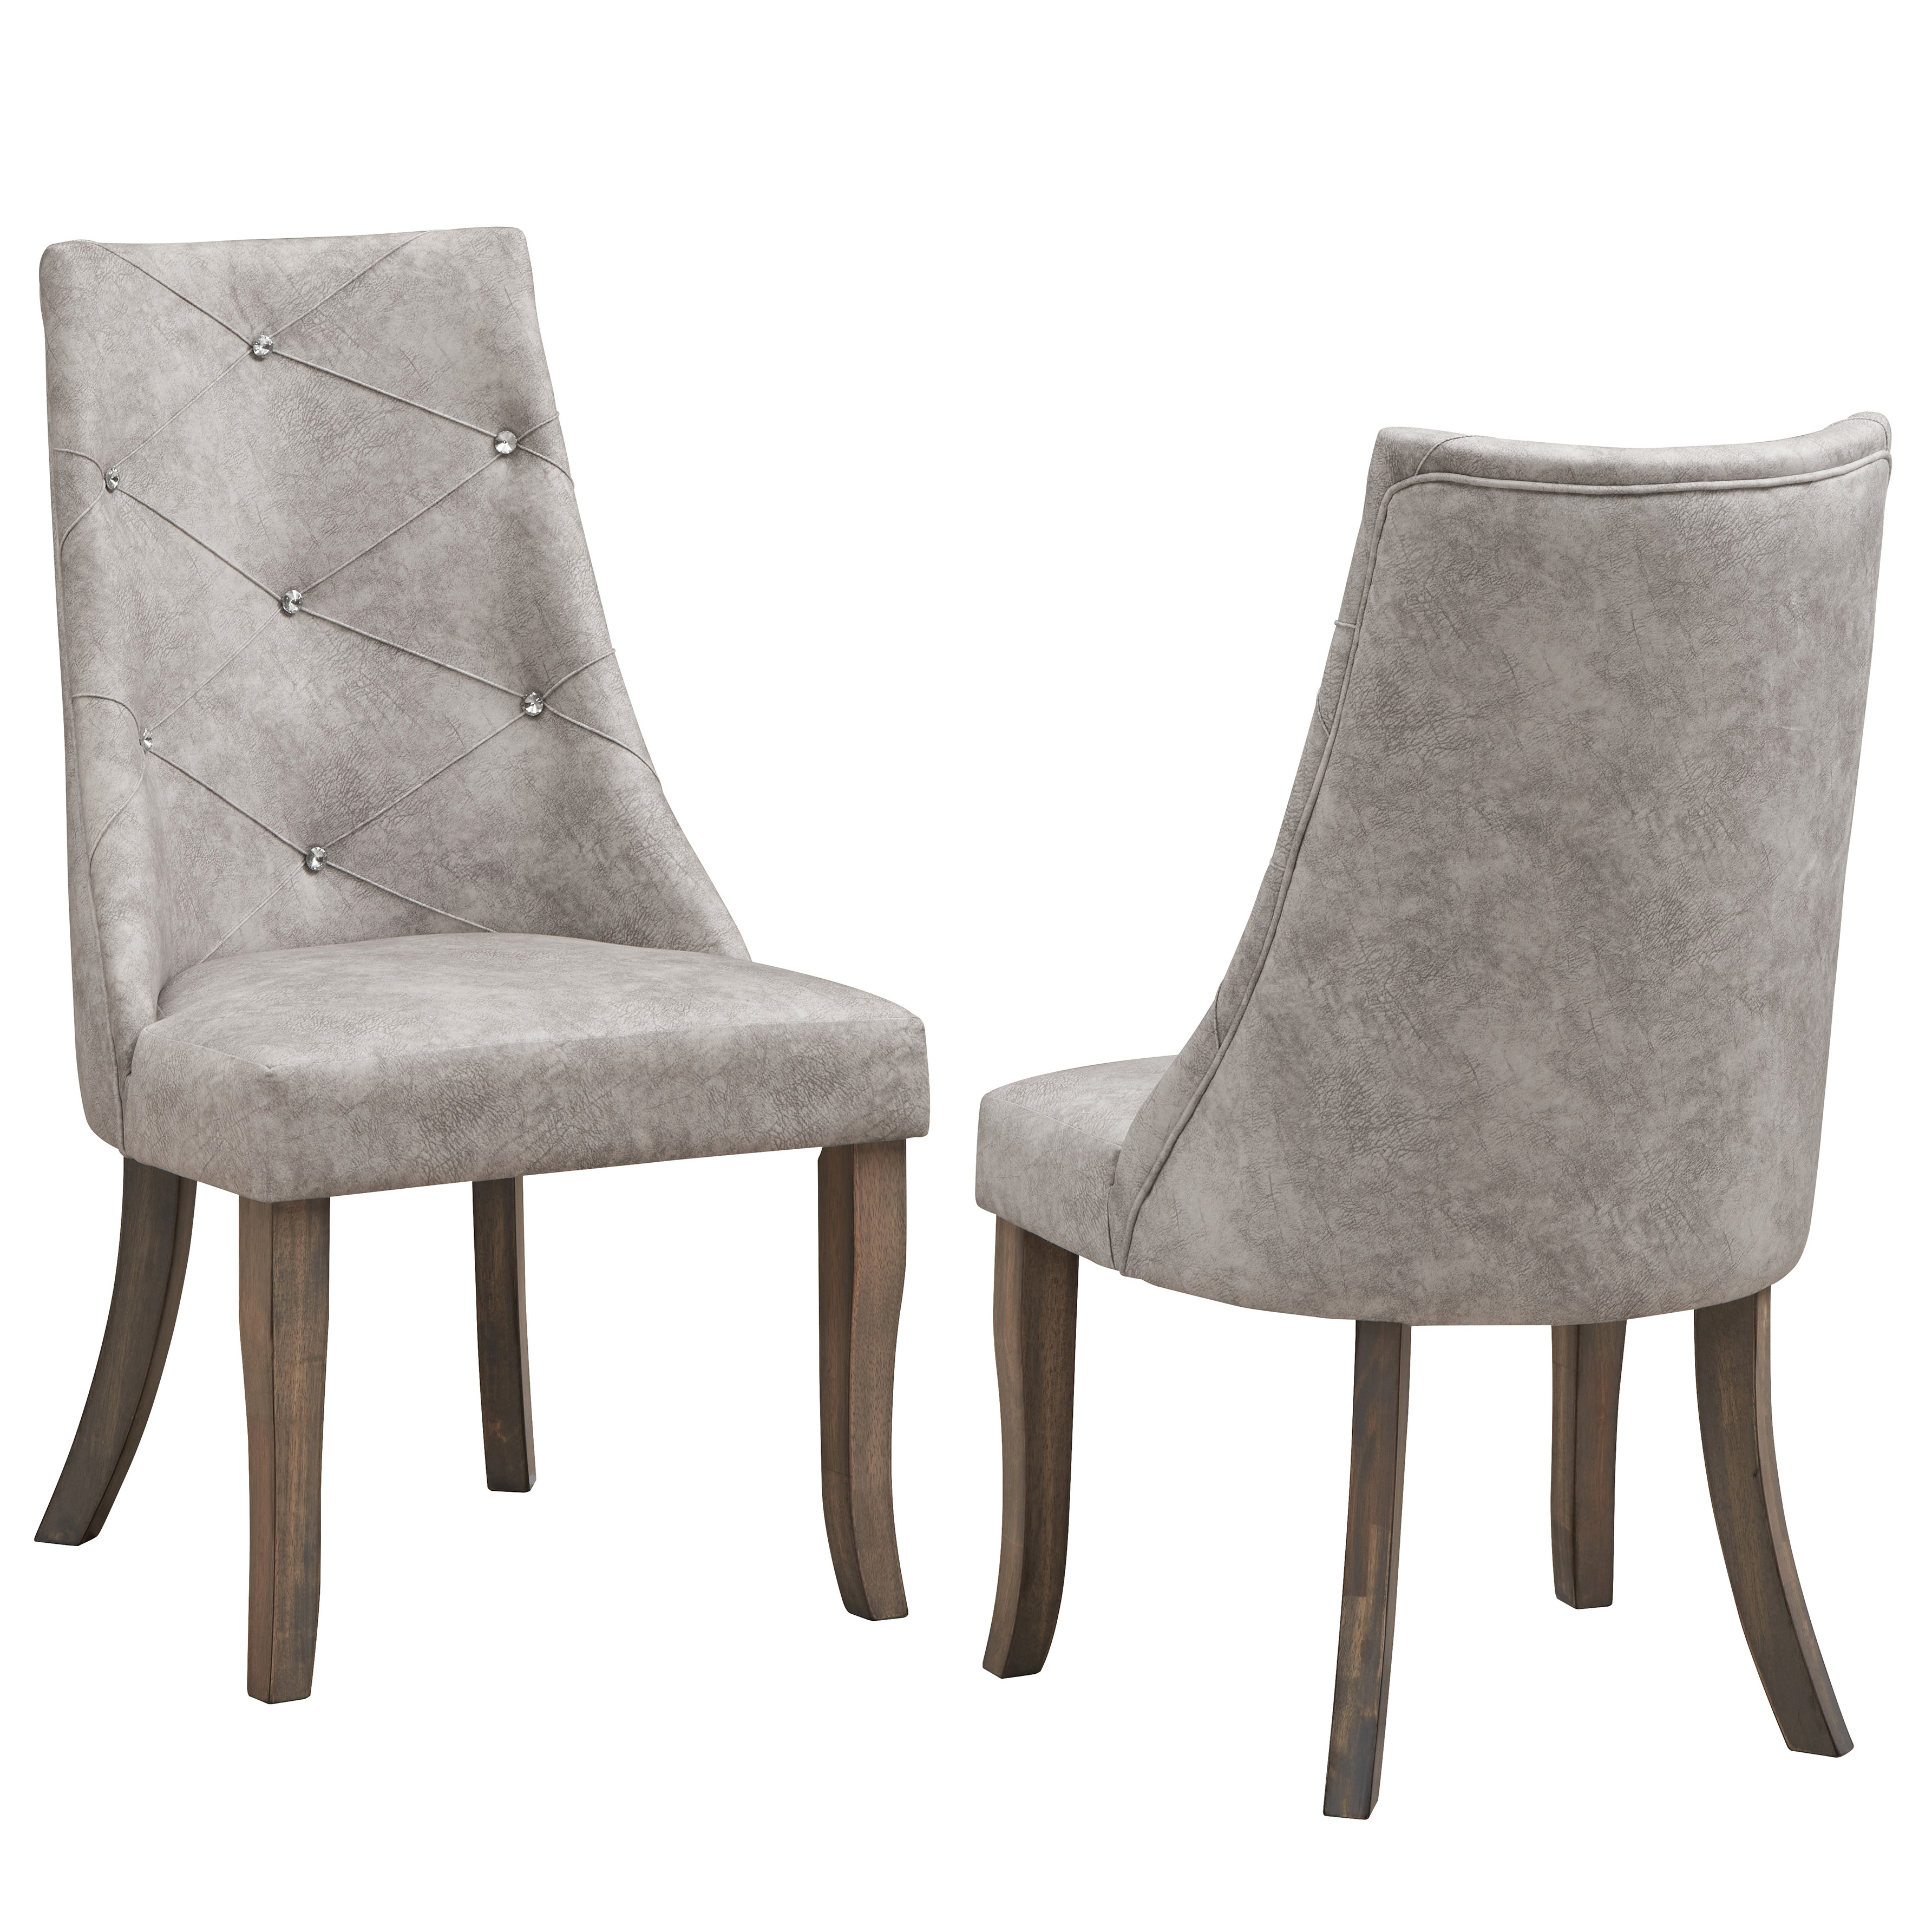 Skylar Dining Chairs (Silver) - Set of 2